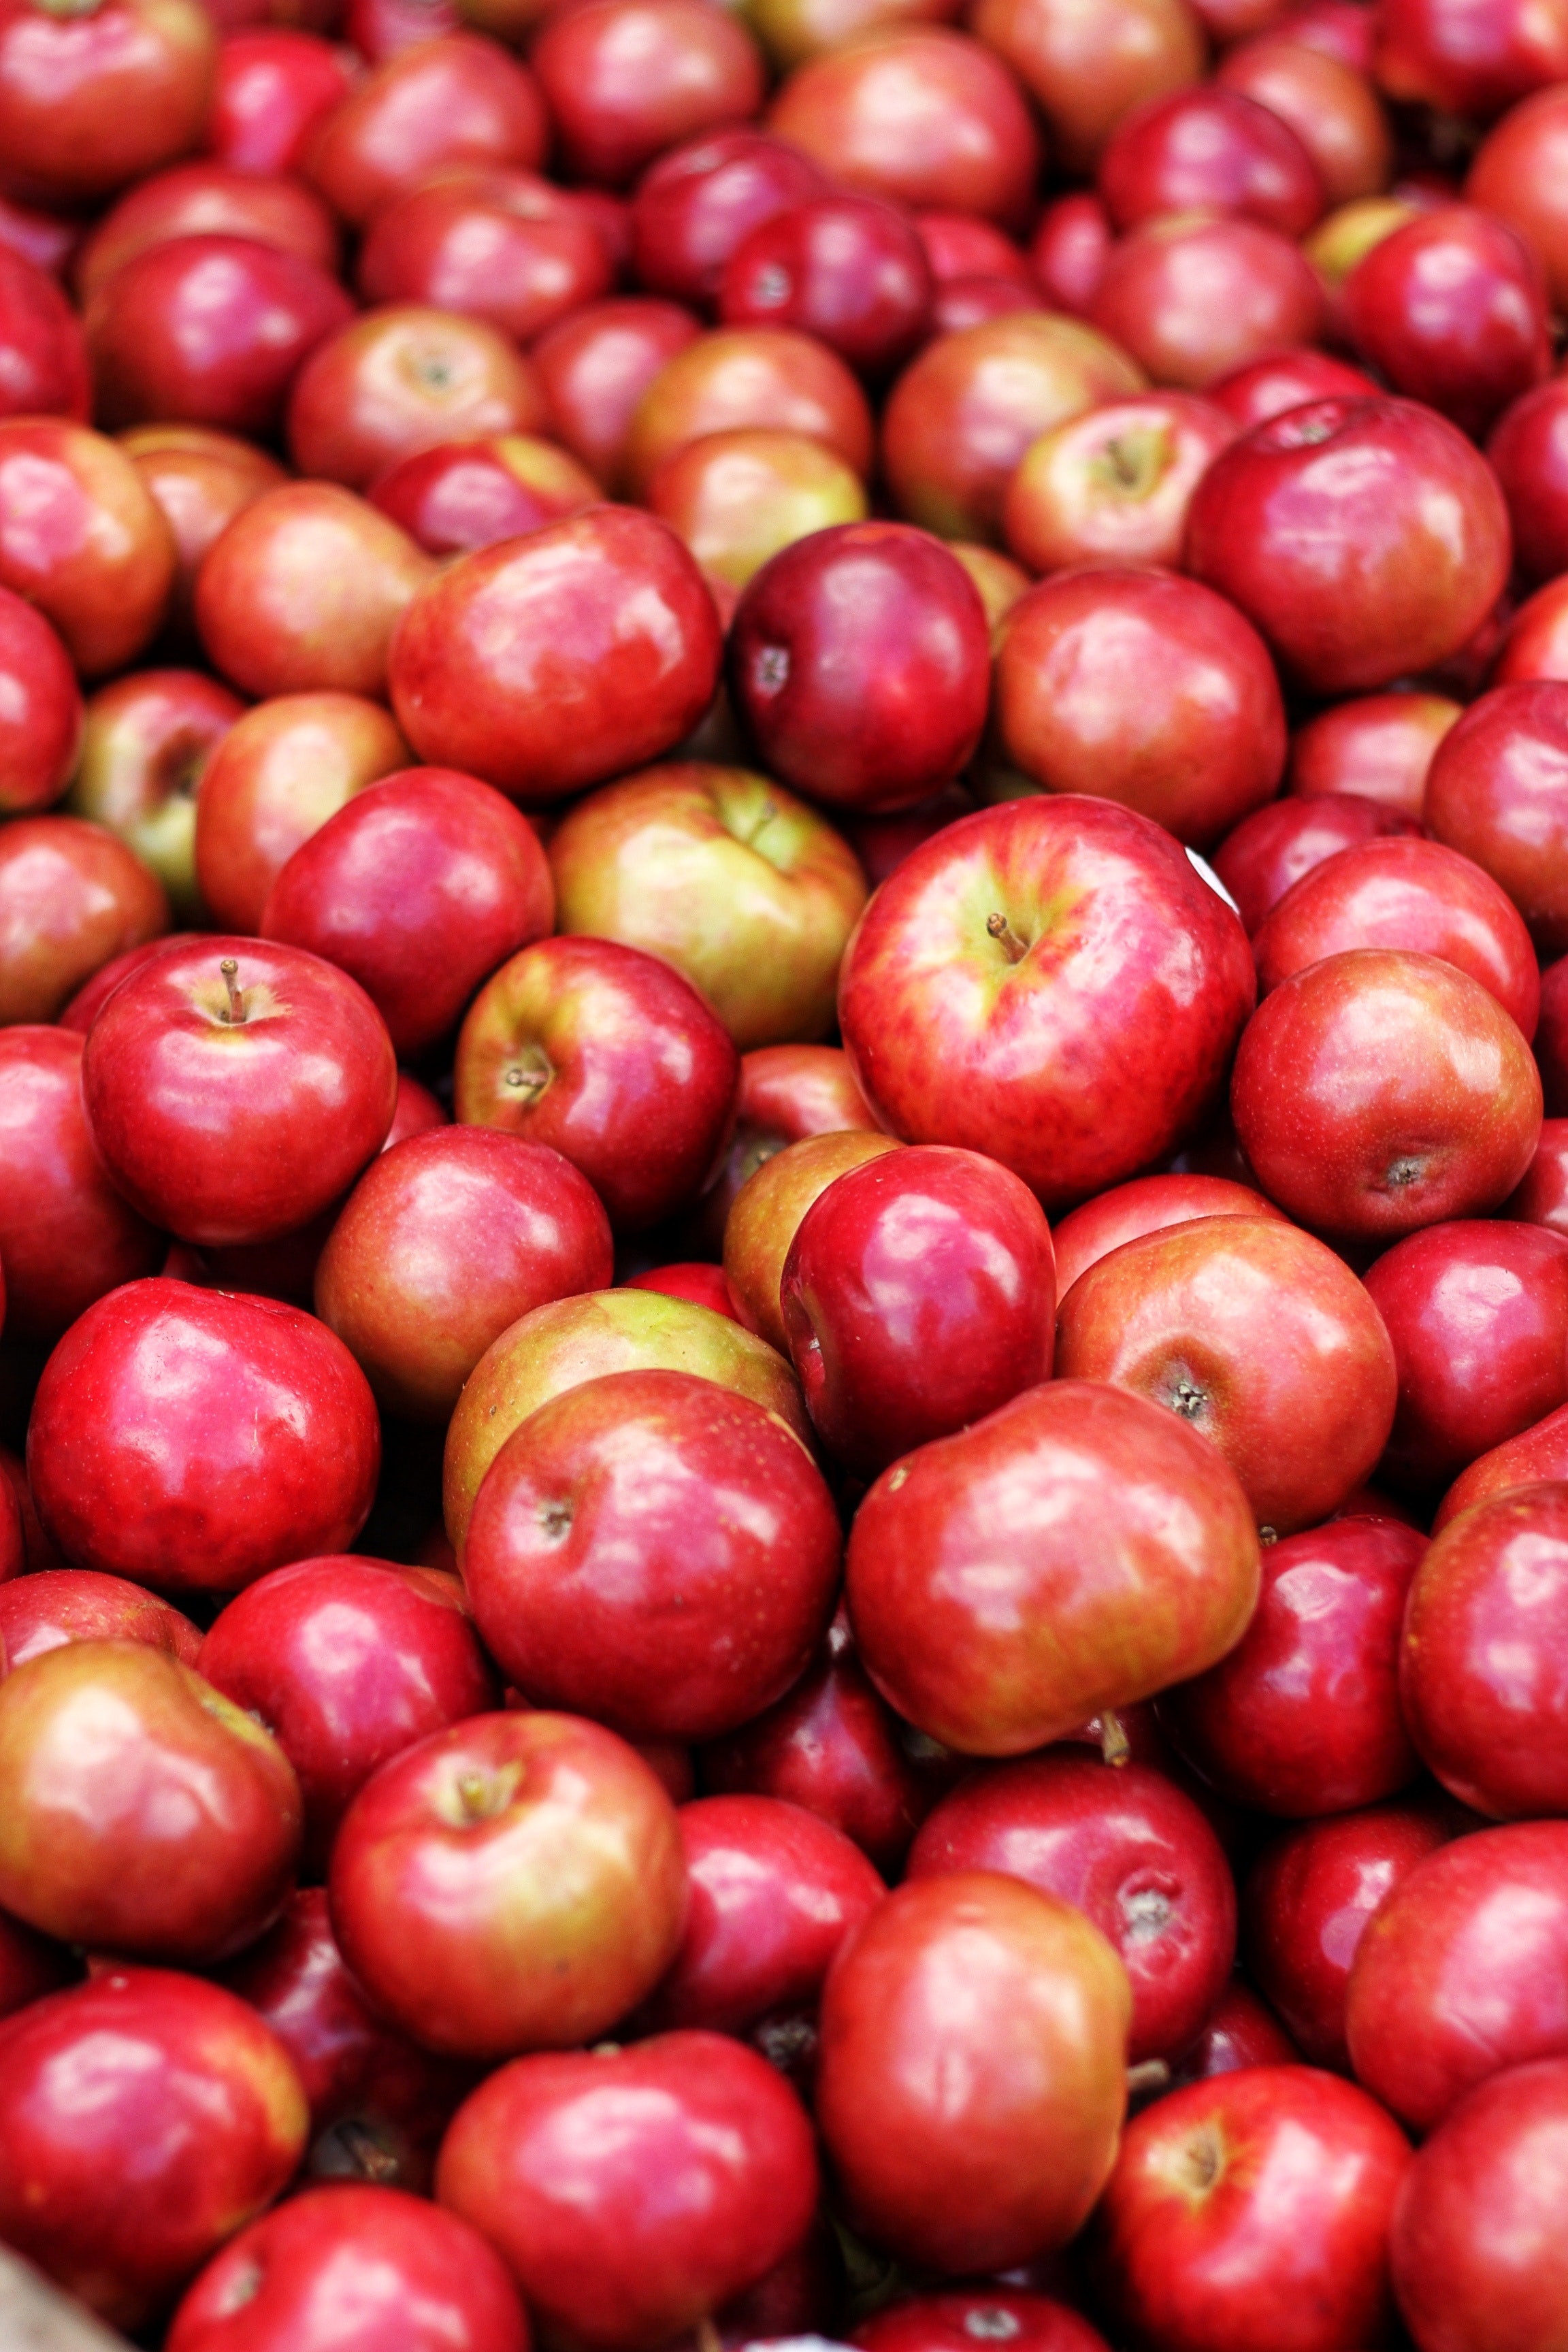 Close up of apples